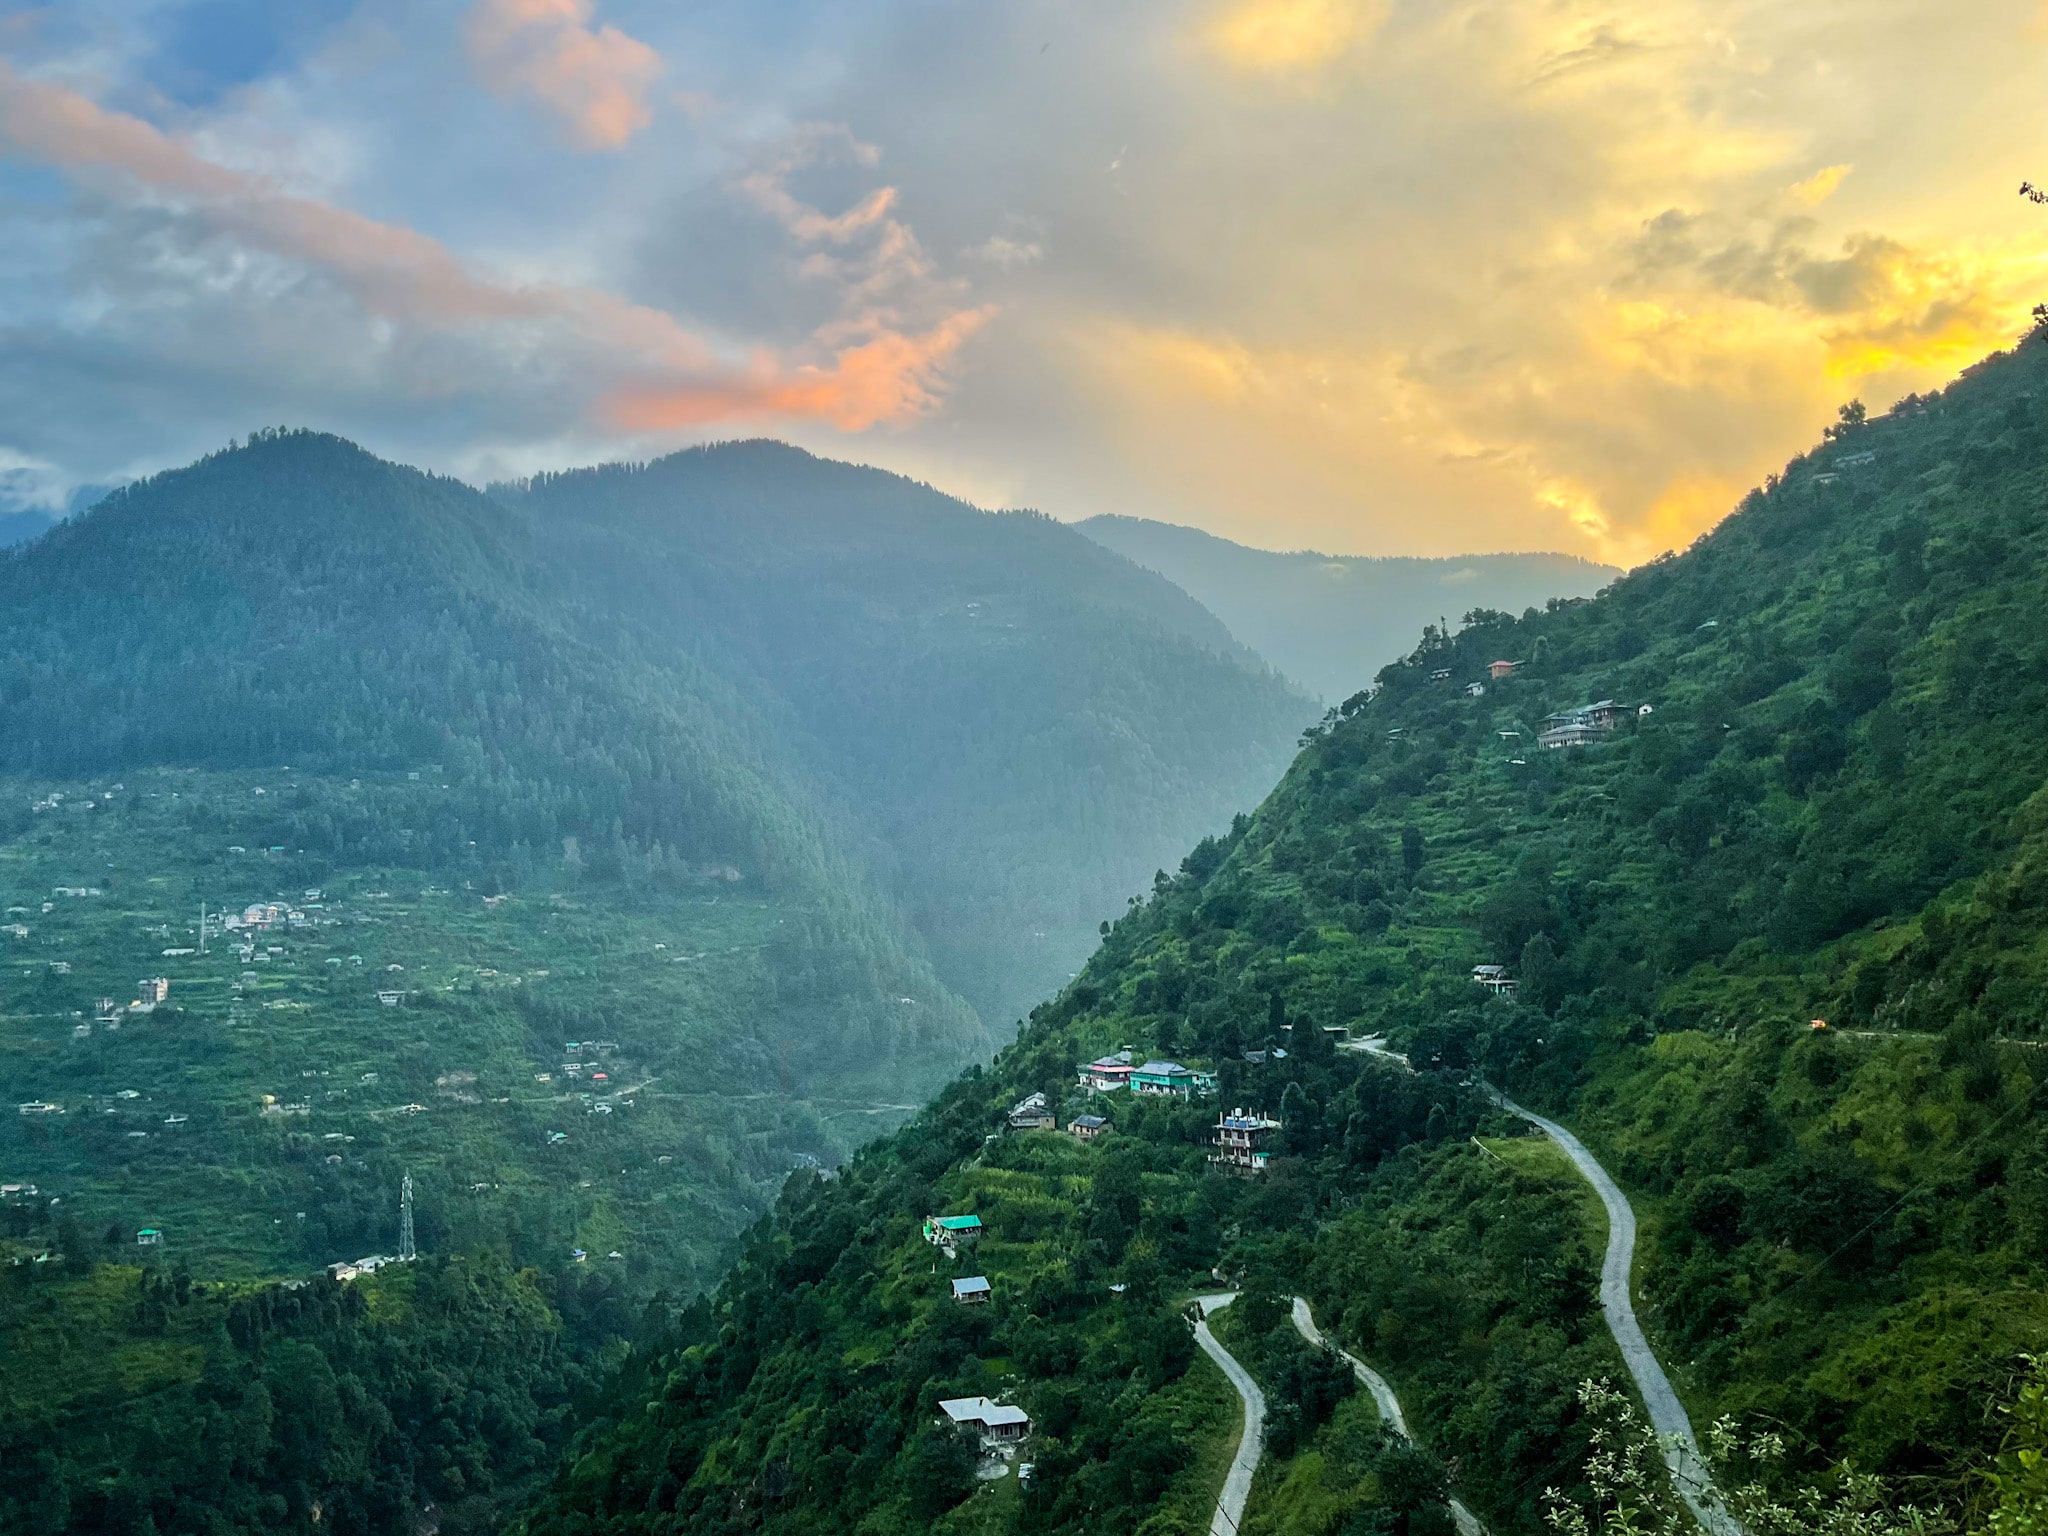 The spectacular Tirthan Valley